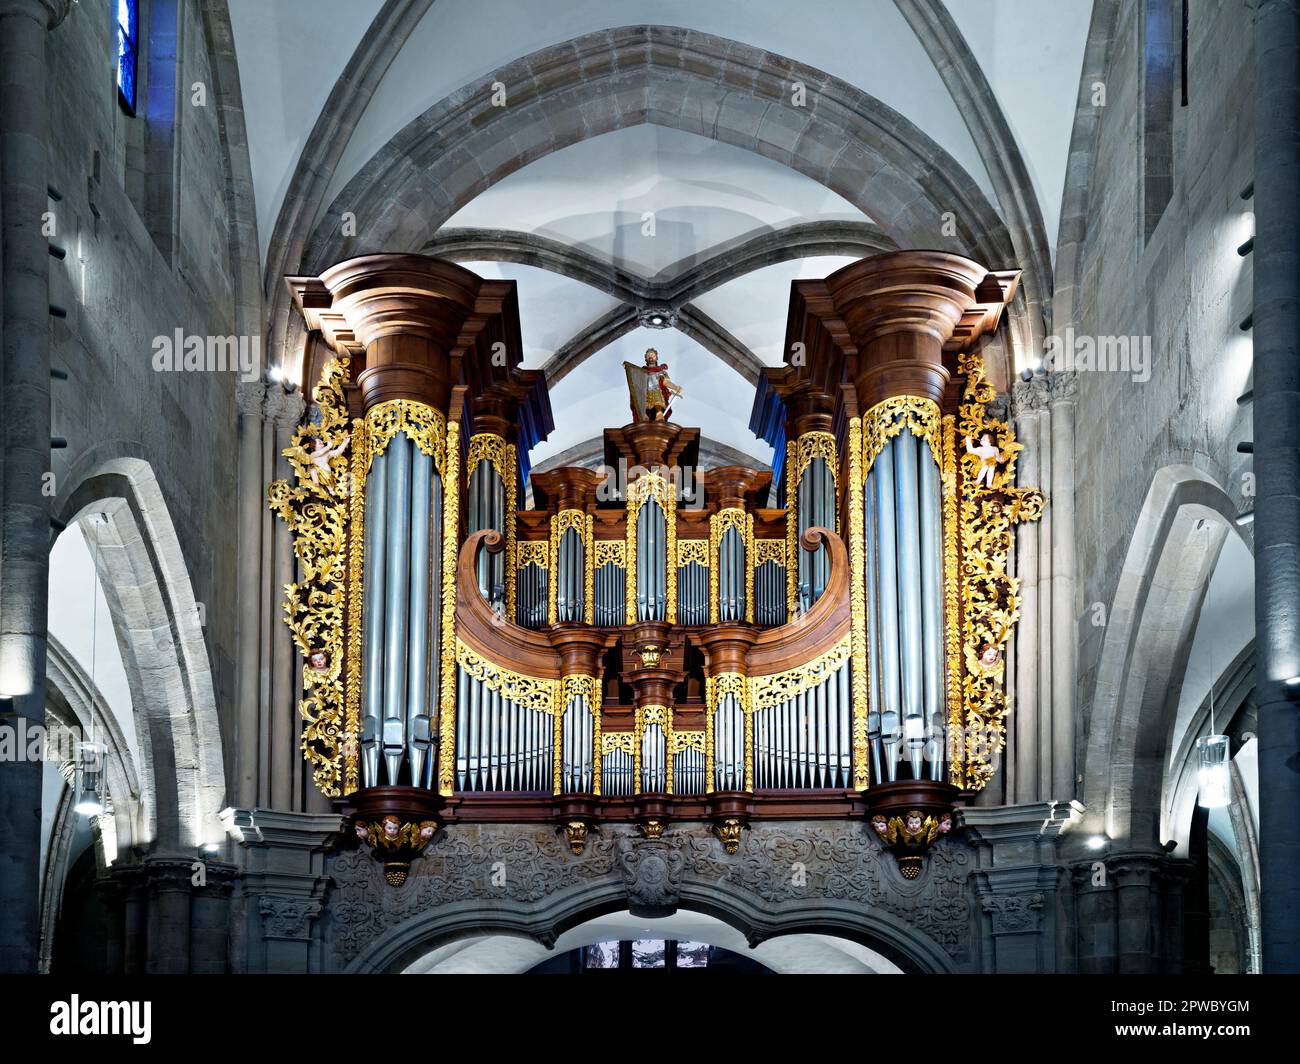 Organ in the Tholey Abbey Church, Saarland, Germany Stock Photo